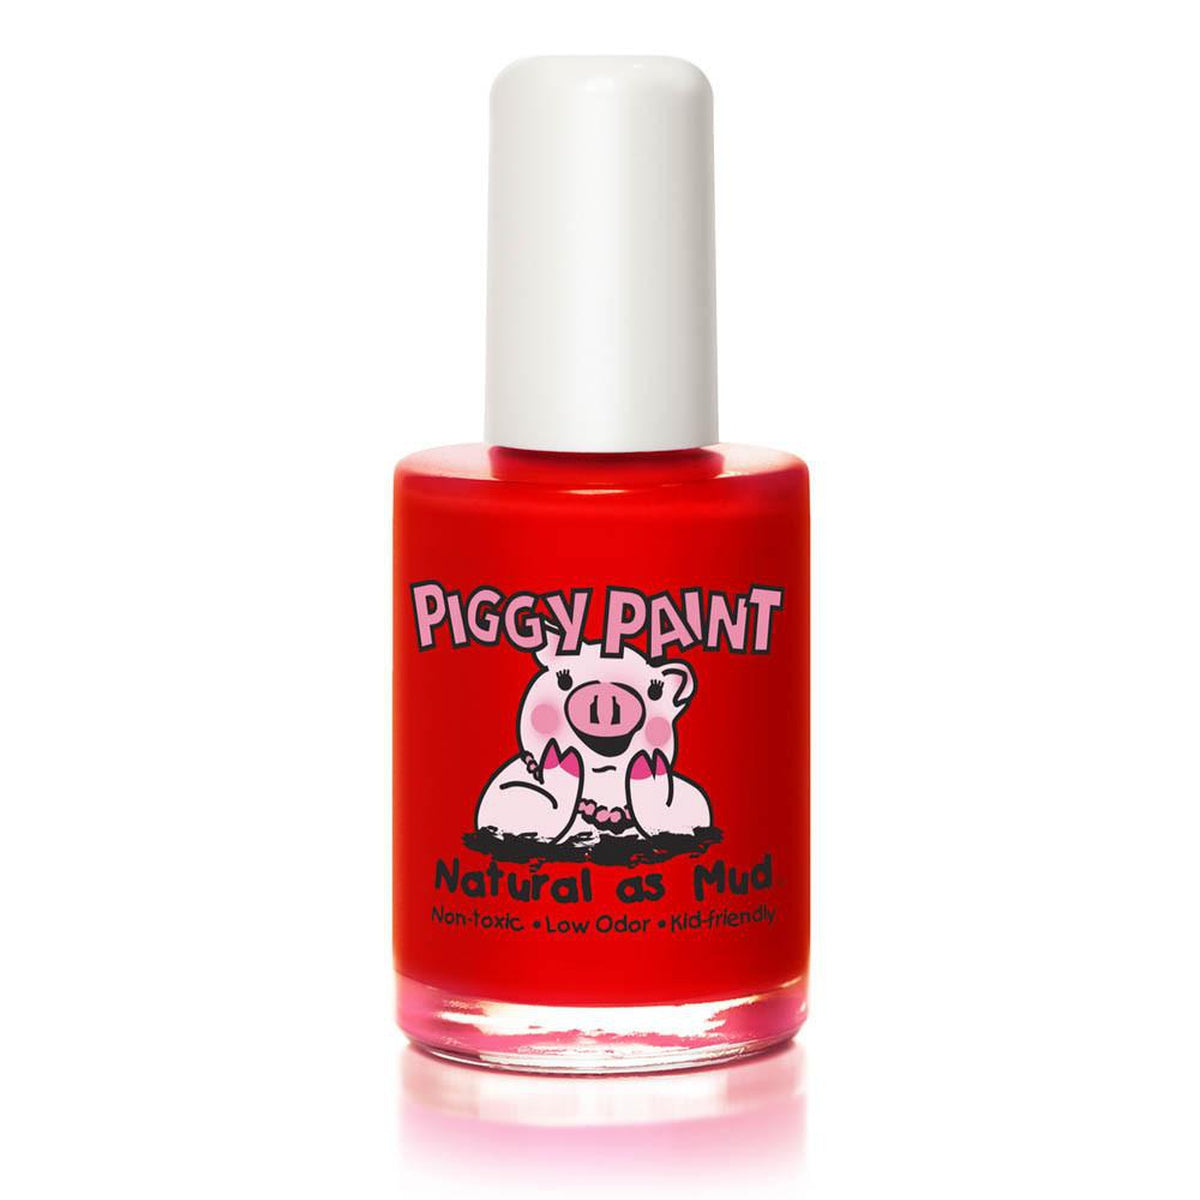 sometimes sweet natural piggy paint nail polish-accessories-Clementine/Stortz-Dilly Dally Kids